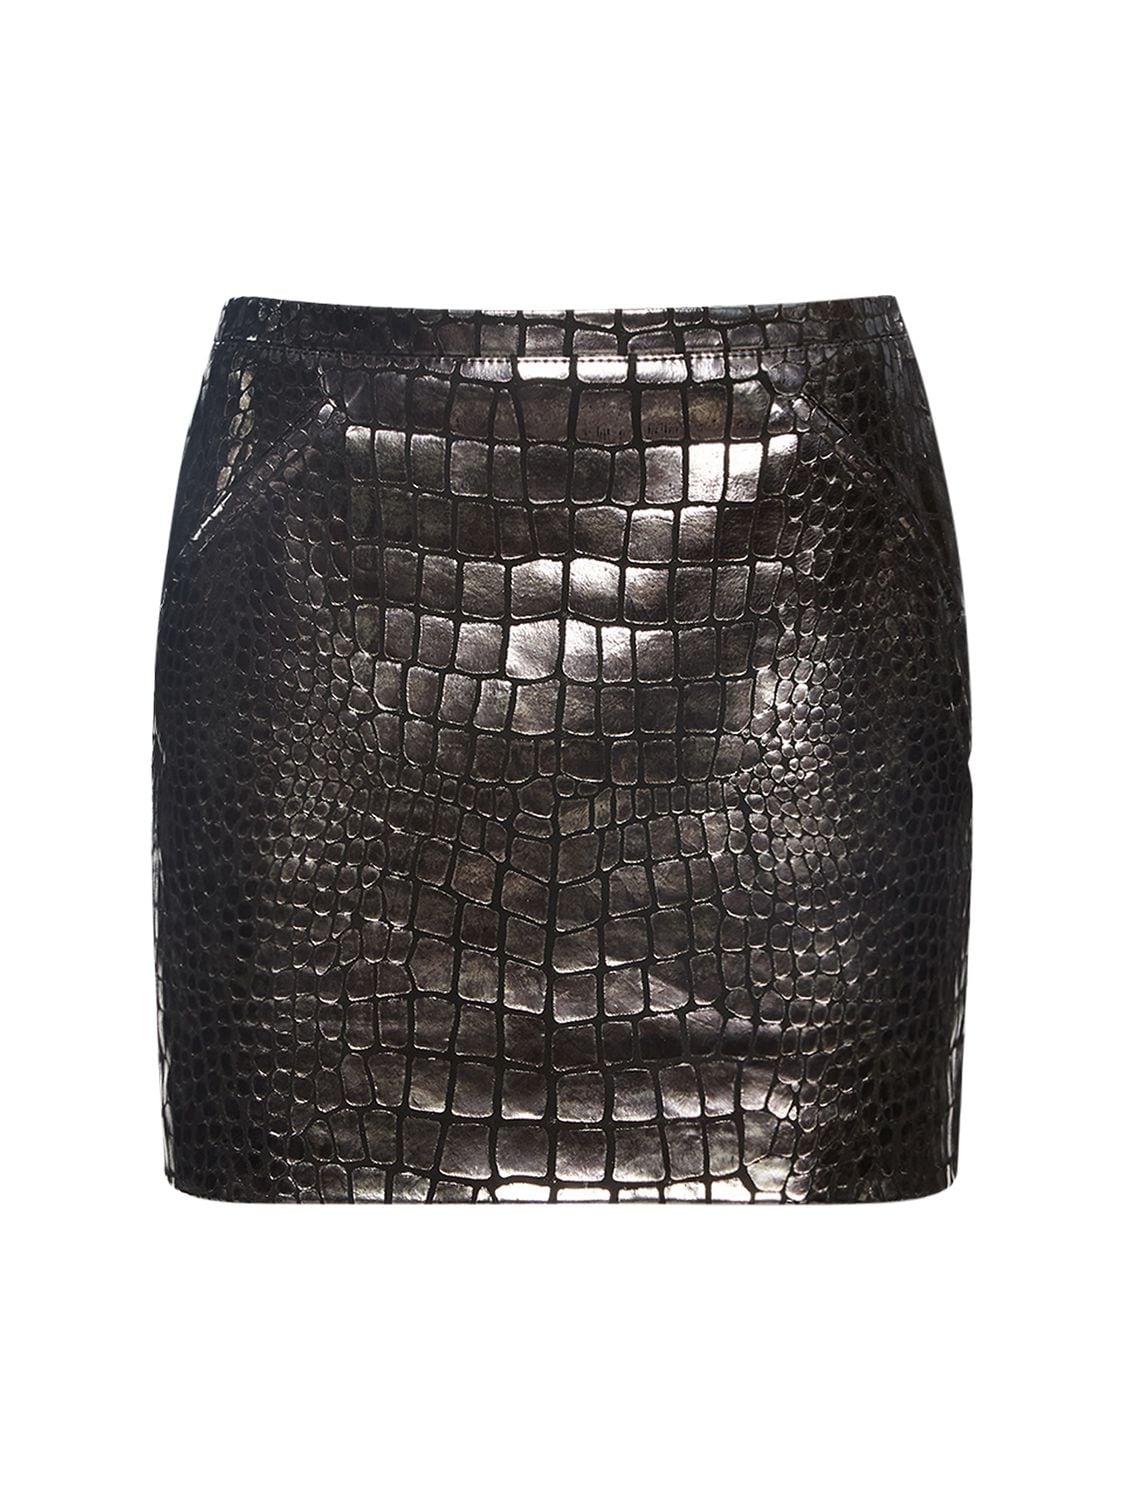 Tom Ford Croc Embossed Laminated Leather Skirt In Silver,black